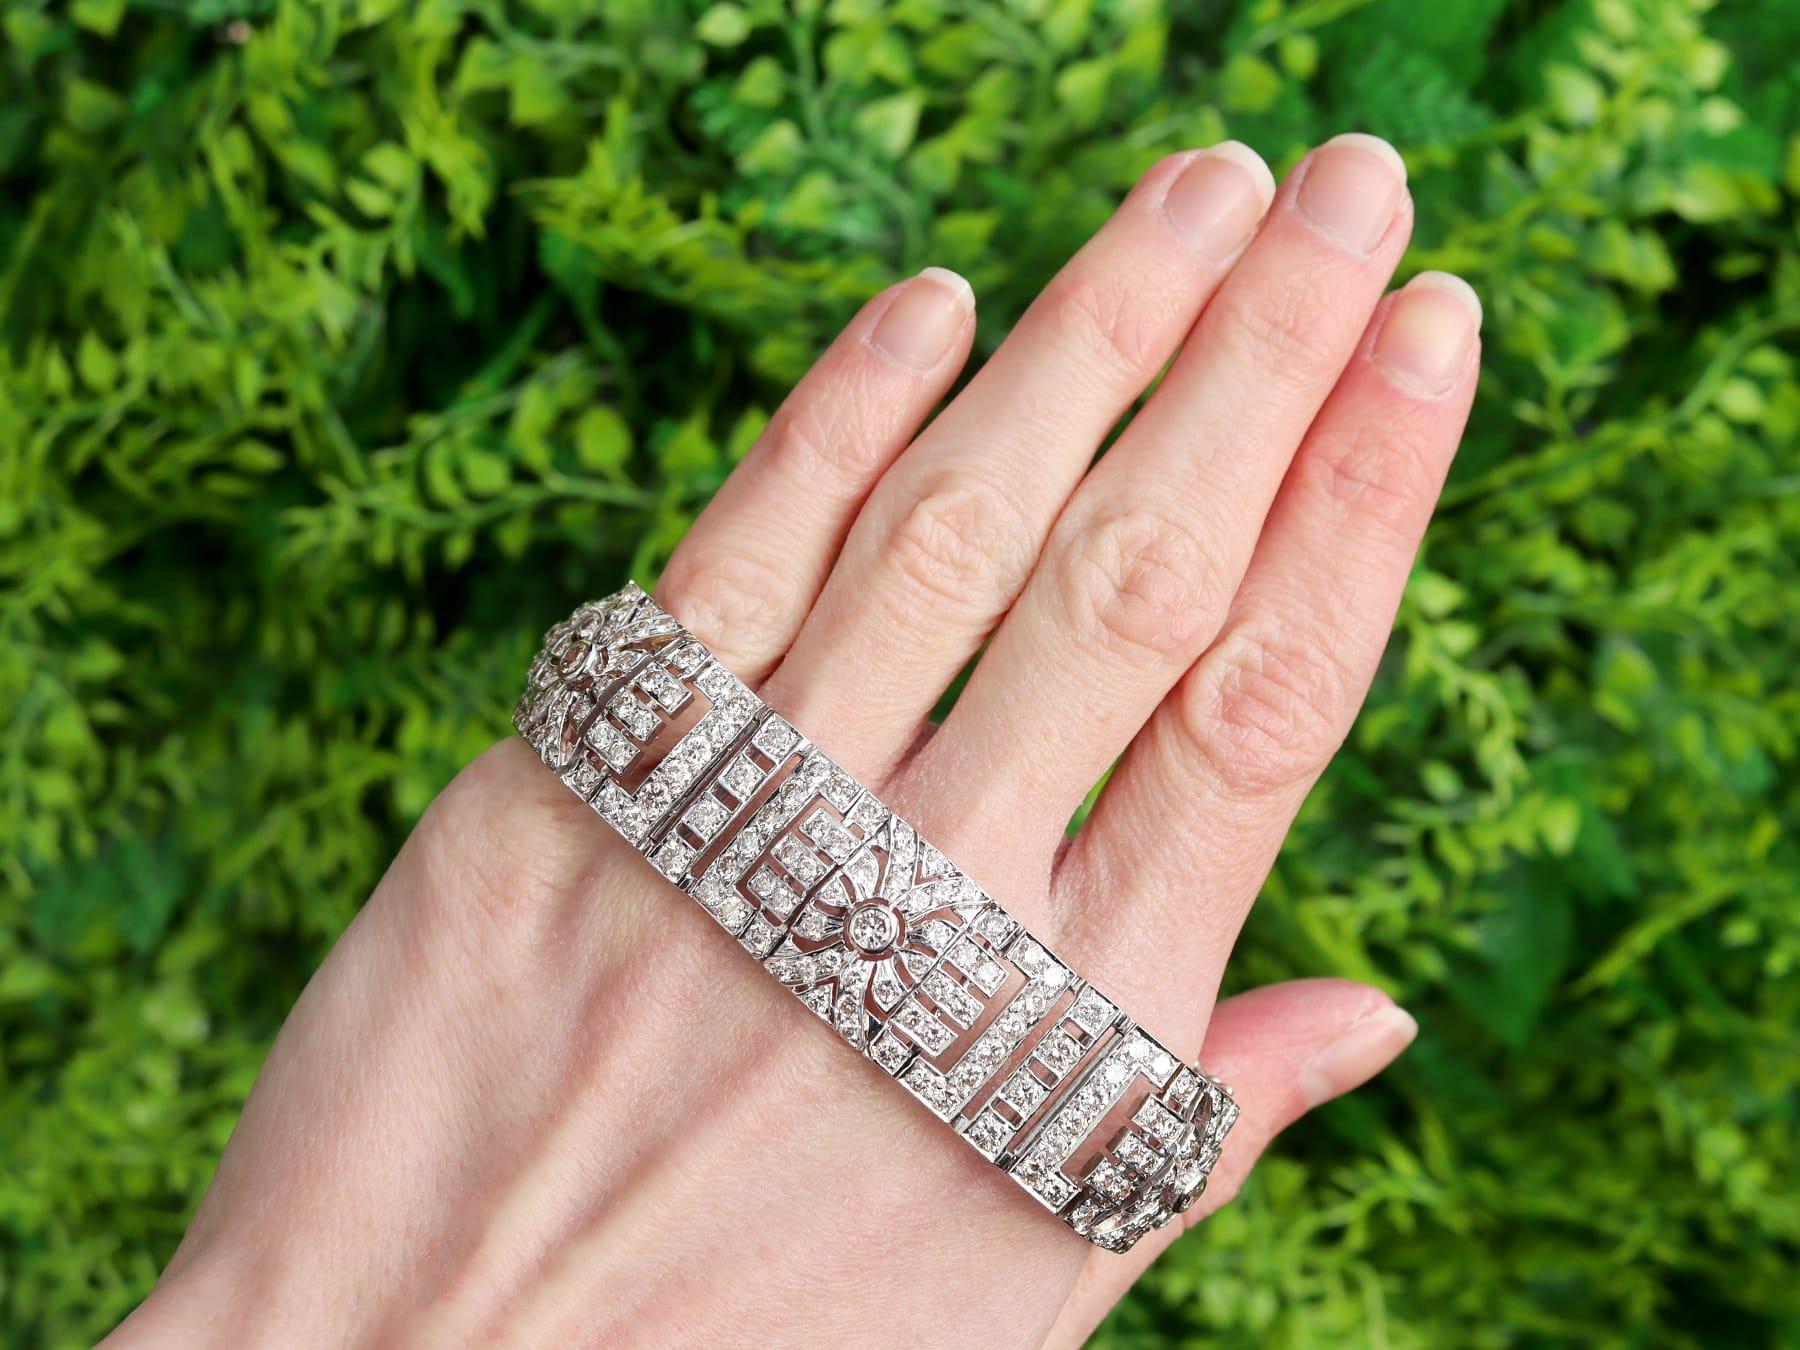 A stunning antique 1930's 12.45 carat diamond and 18 carat white gold bracelet - boxed; part of our diverse antique jewellery and estate jewelry collections

This stunning, fine and impressive antique diamond bracelet has been crafted in 18ct white